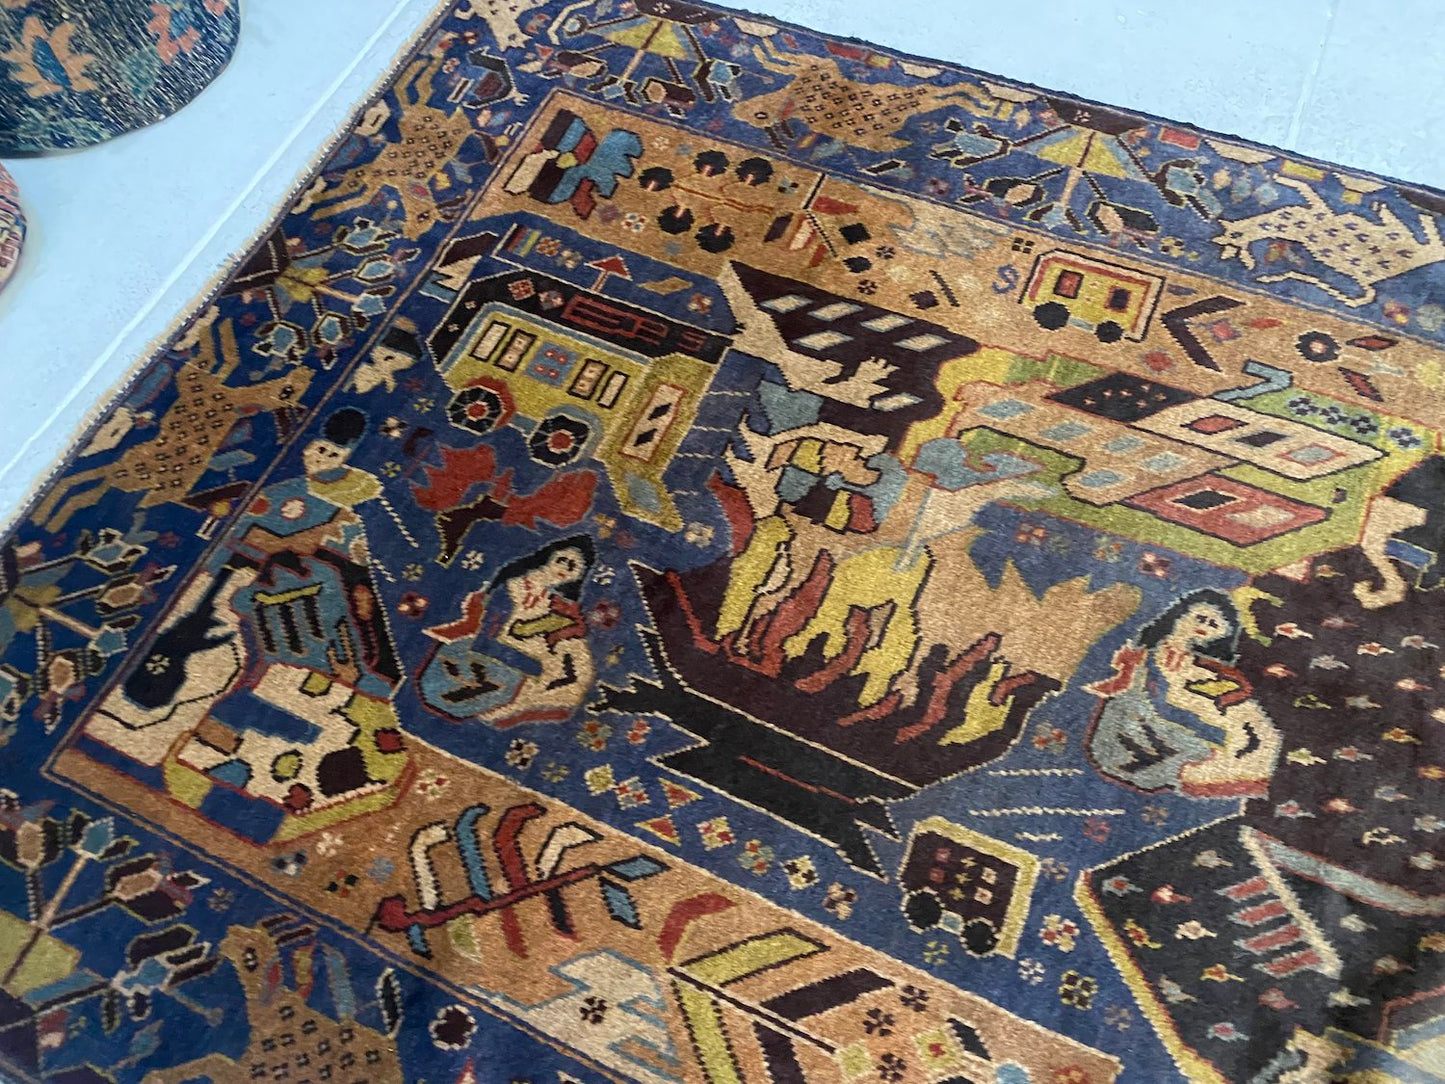 Detailed hand woven Afghan Pictorial Rug depicting figures around a fire near a caravan, along with deep blue hues with beige, black and pale green details of plants and animals. Perfect for a bedroom, living room, studio or study.Available from King Kennedy Rugs Los Angeles